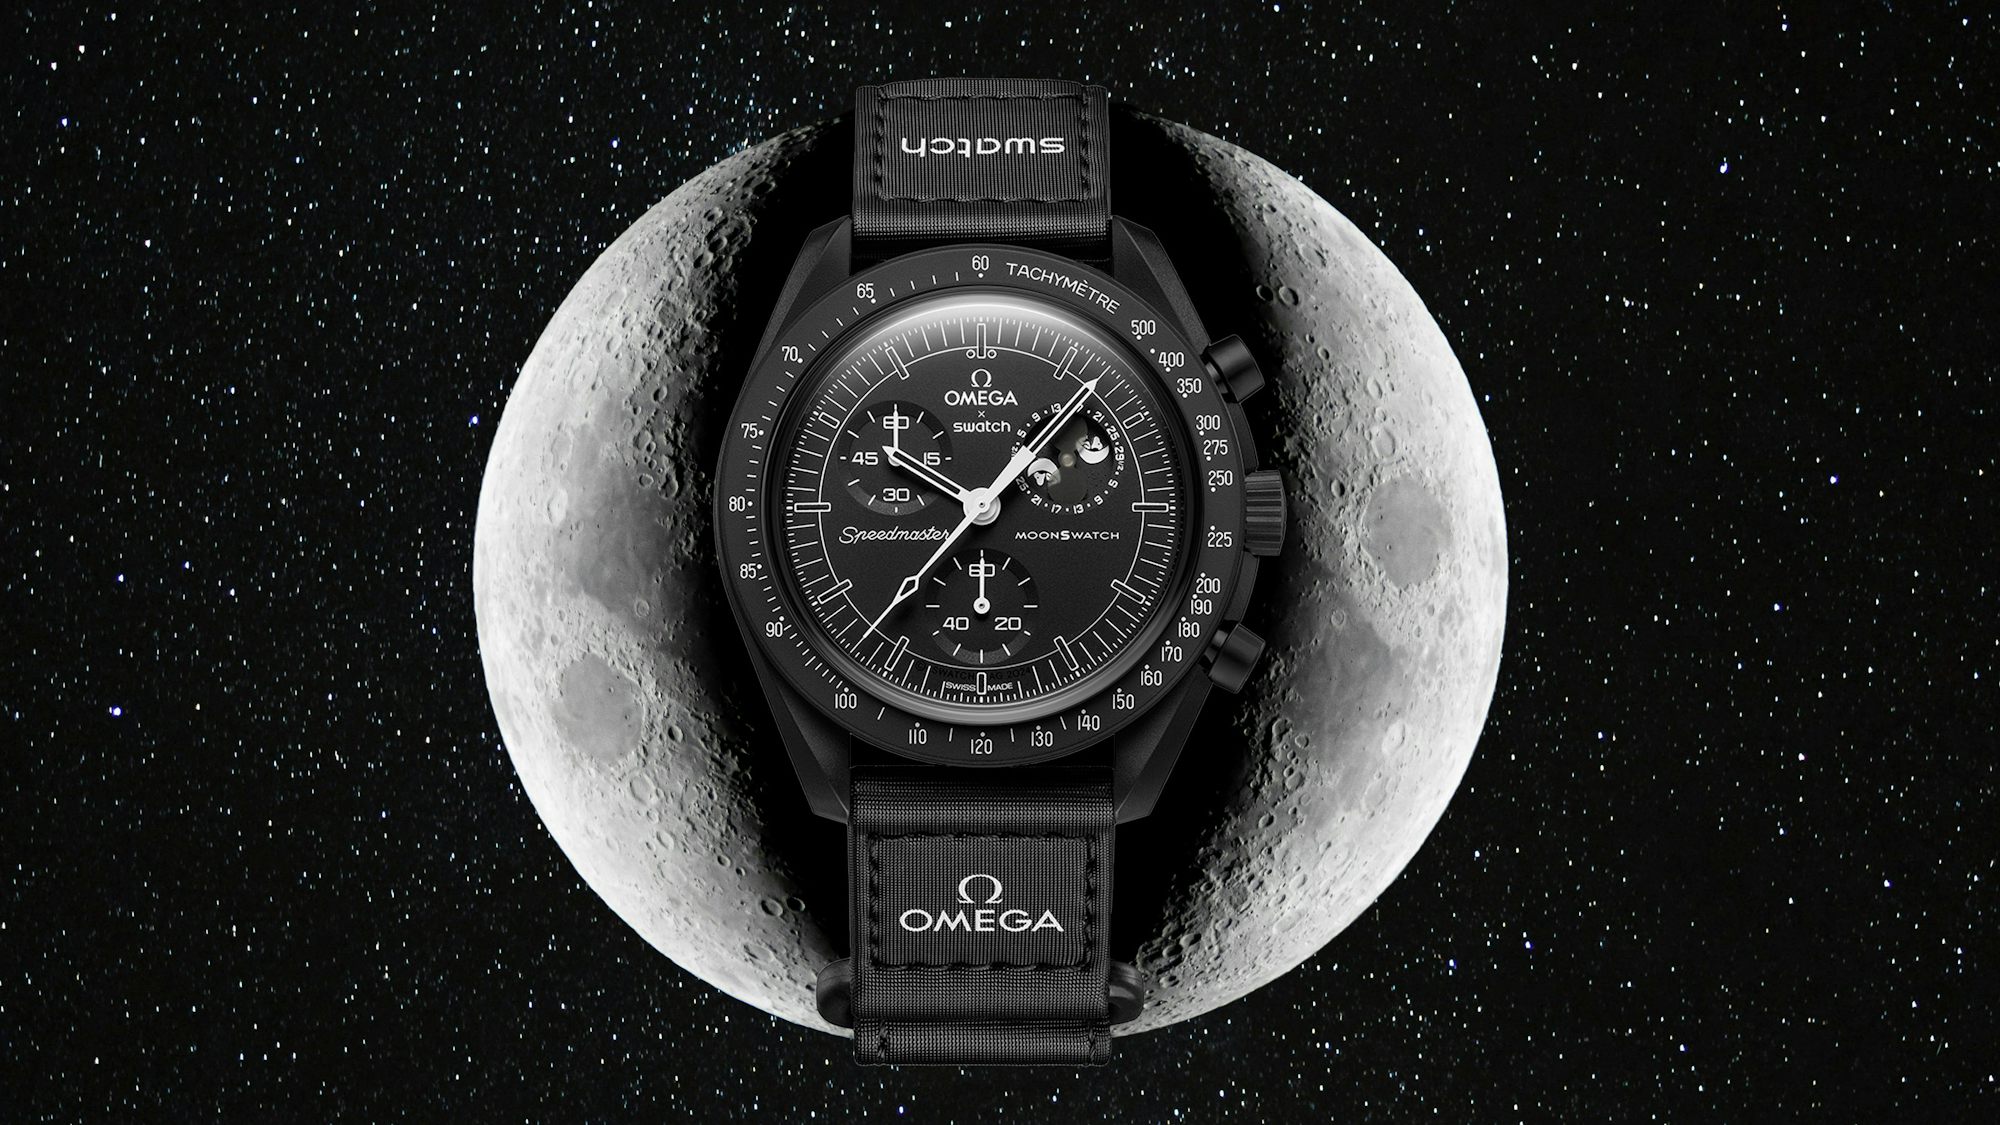 Omega Speedmaster Watches By DaleVito - cover